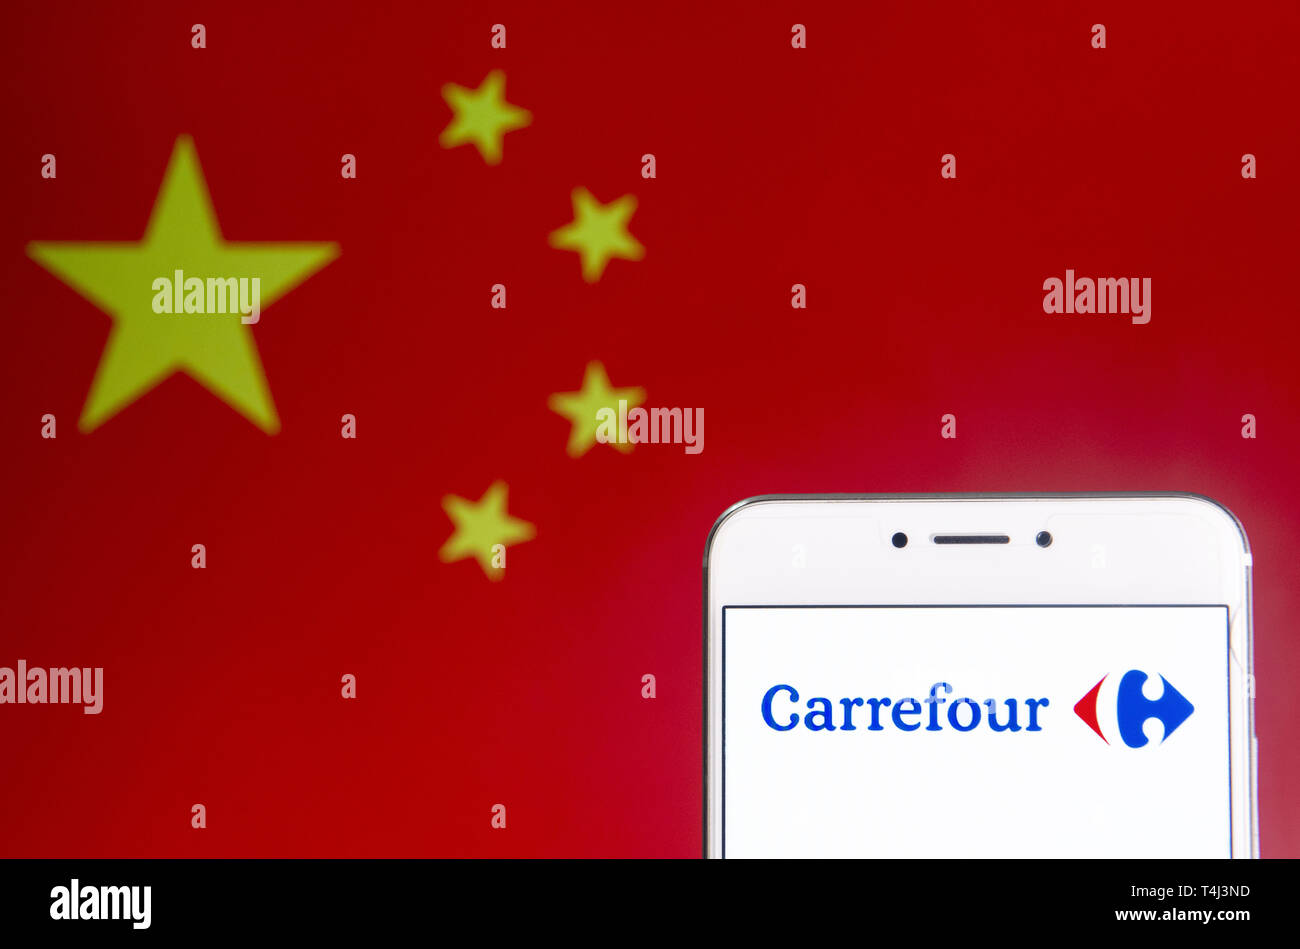 April 6, 2019 - Hong Kong - In this photo illustration a French multinational supermarket chain, Carrefour, logo is seen on an Android mobile device with People's Republic of China flag in the background. (Credit Image: © Budrul Chukrut/SOPA Images via ZUMA Wire) Stock Photo